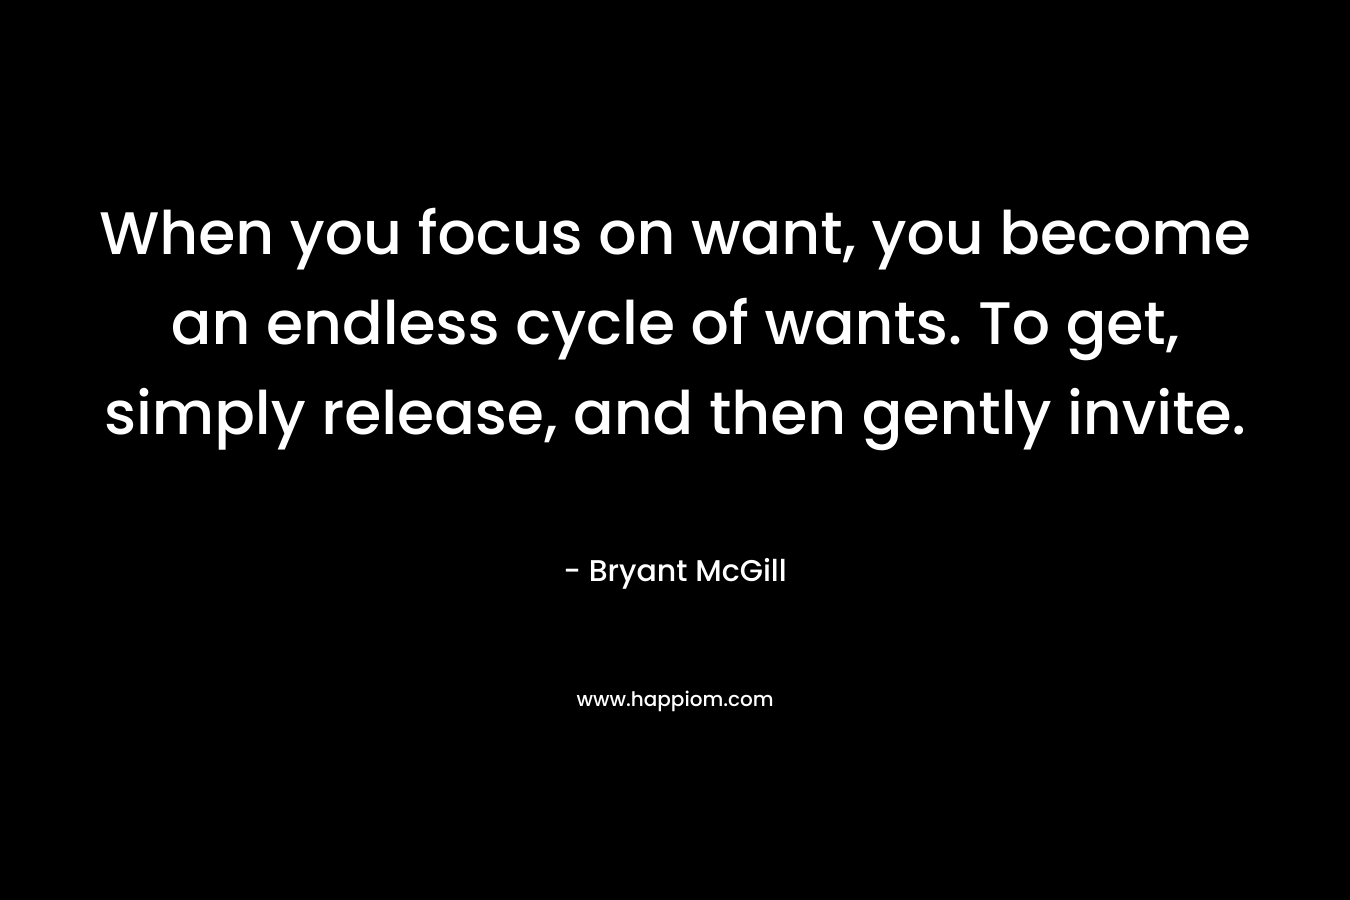 When you focus on want, you become an endless cycle of wants. To get, simply release, and then gently invite. – Bryant McGill